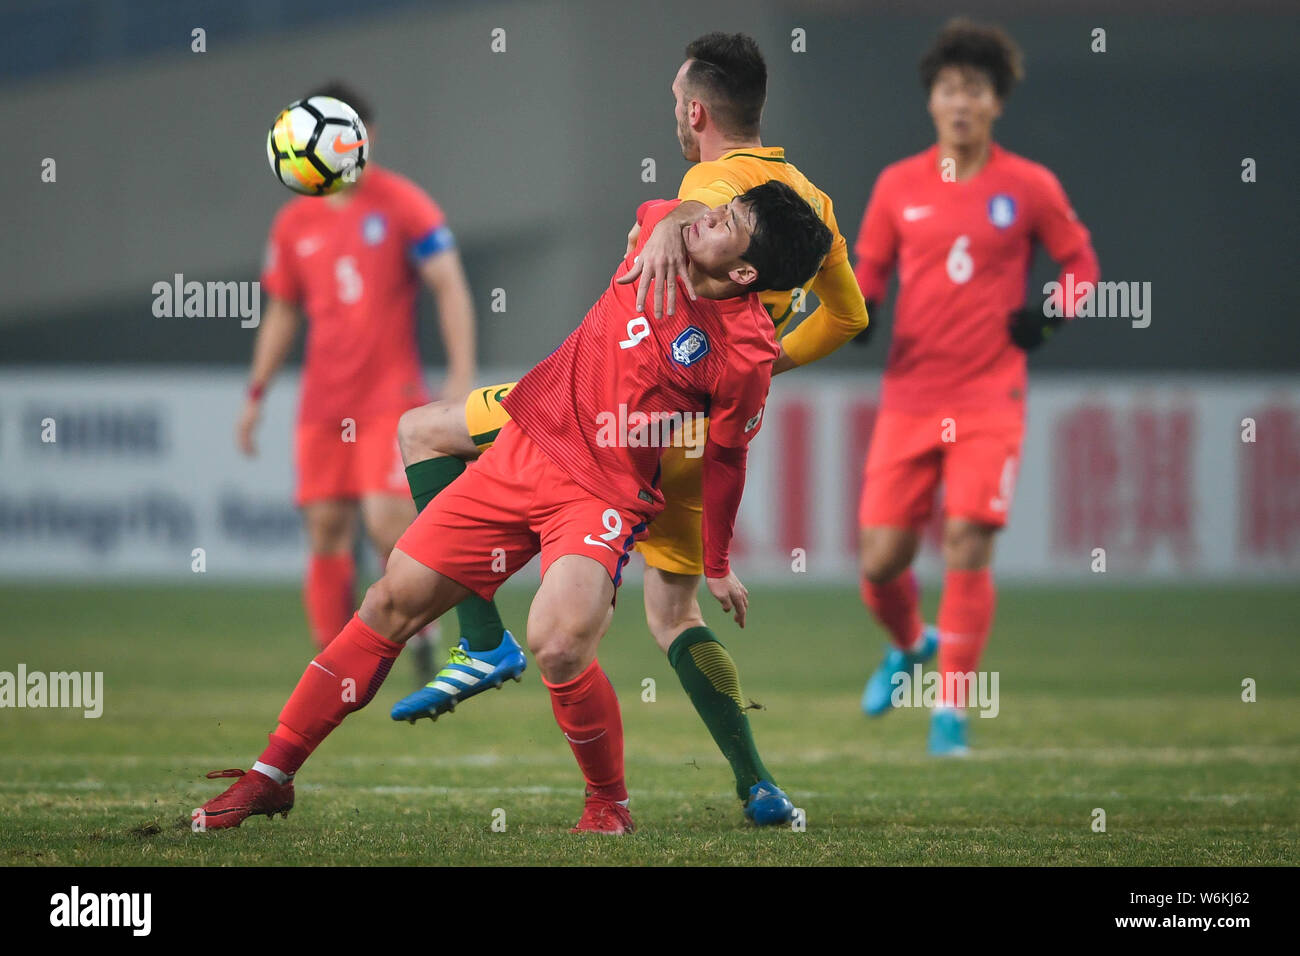 Lee Keun-ho, front, of South Korea challenges a player of Australia in their Group D match during the 2018 AFC U-23 Championship in Kunshan city, east Stock Photo